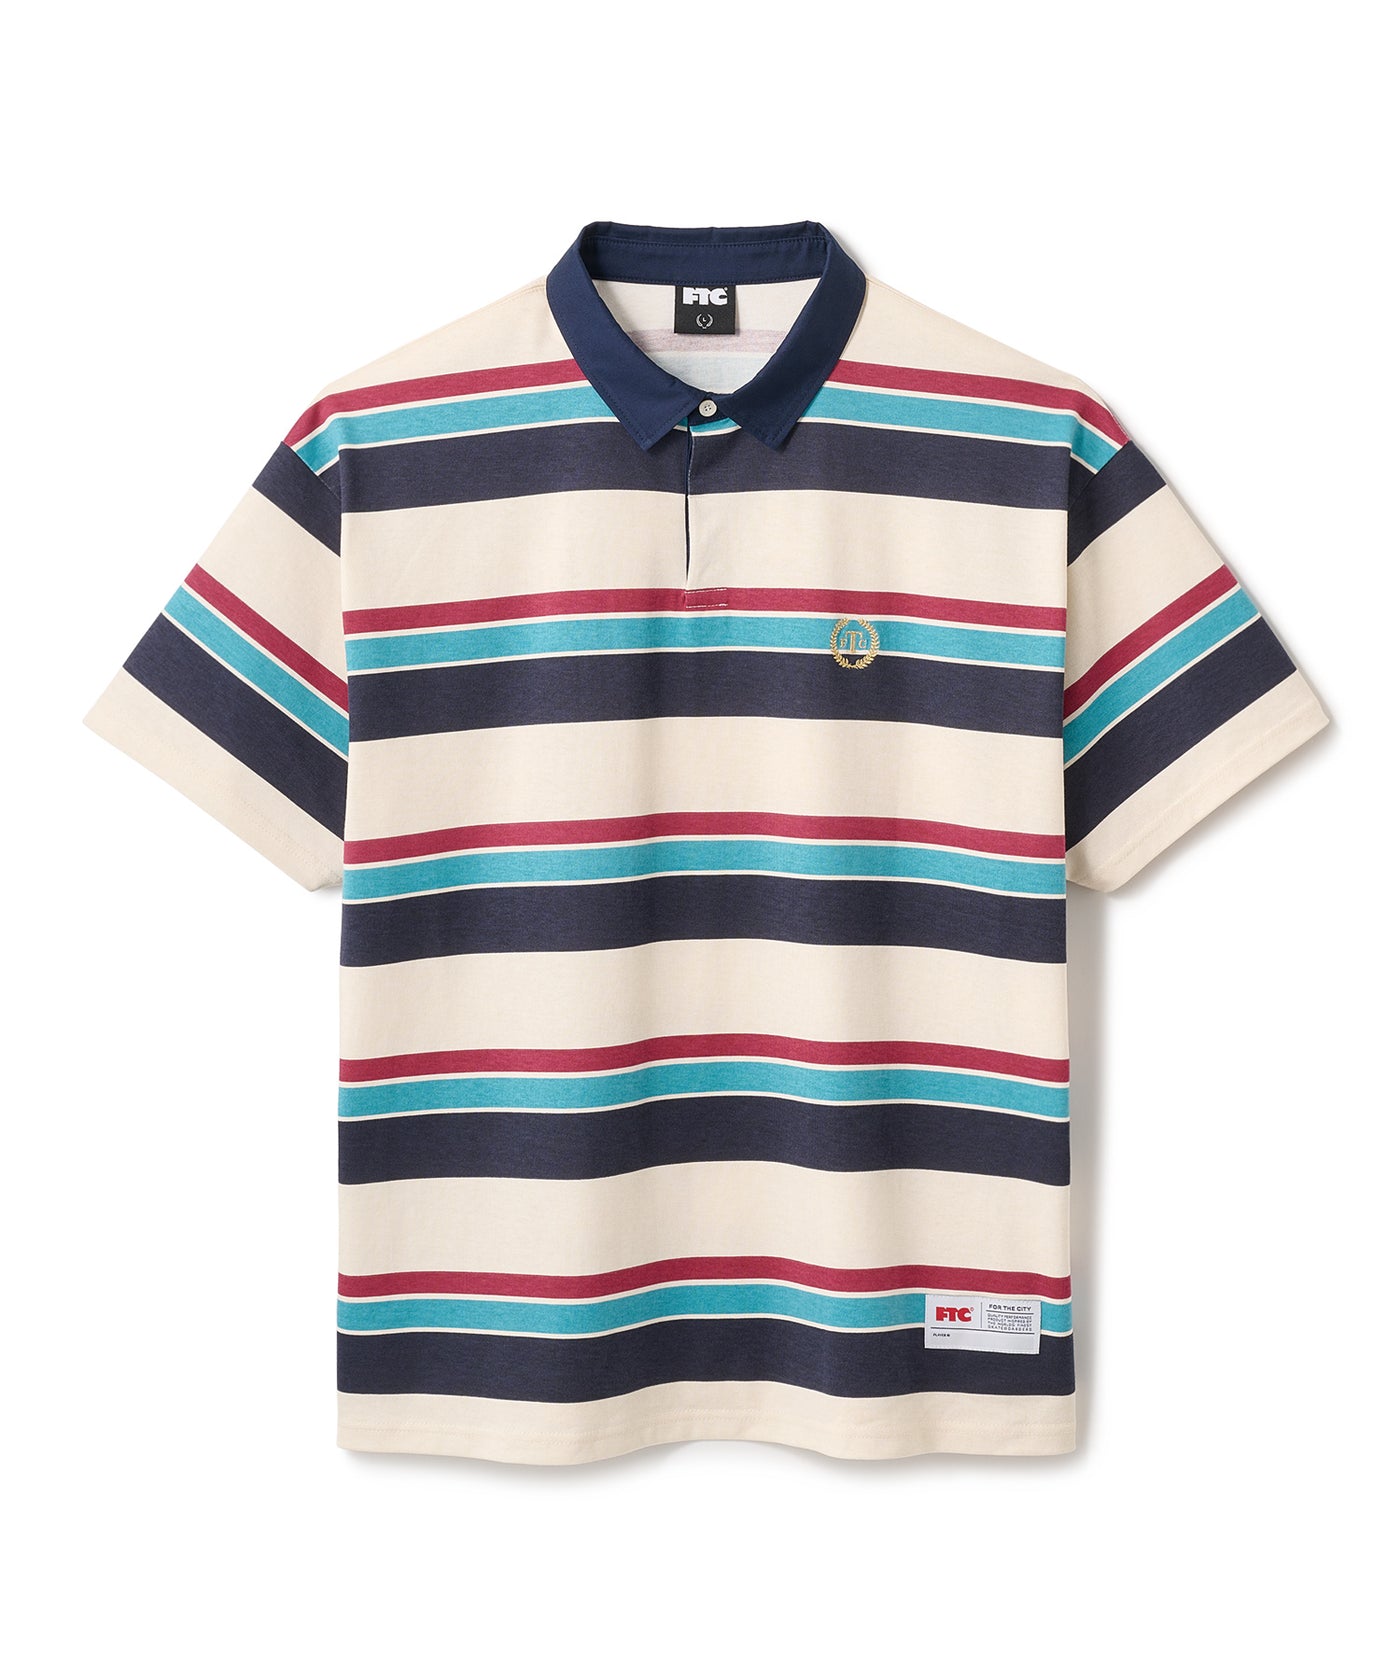 PRINTED STRIPE RUGBY SHIRT – FTC